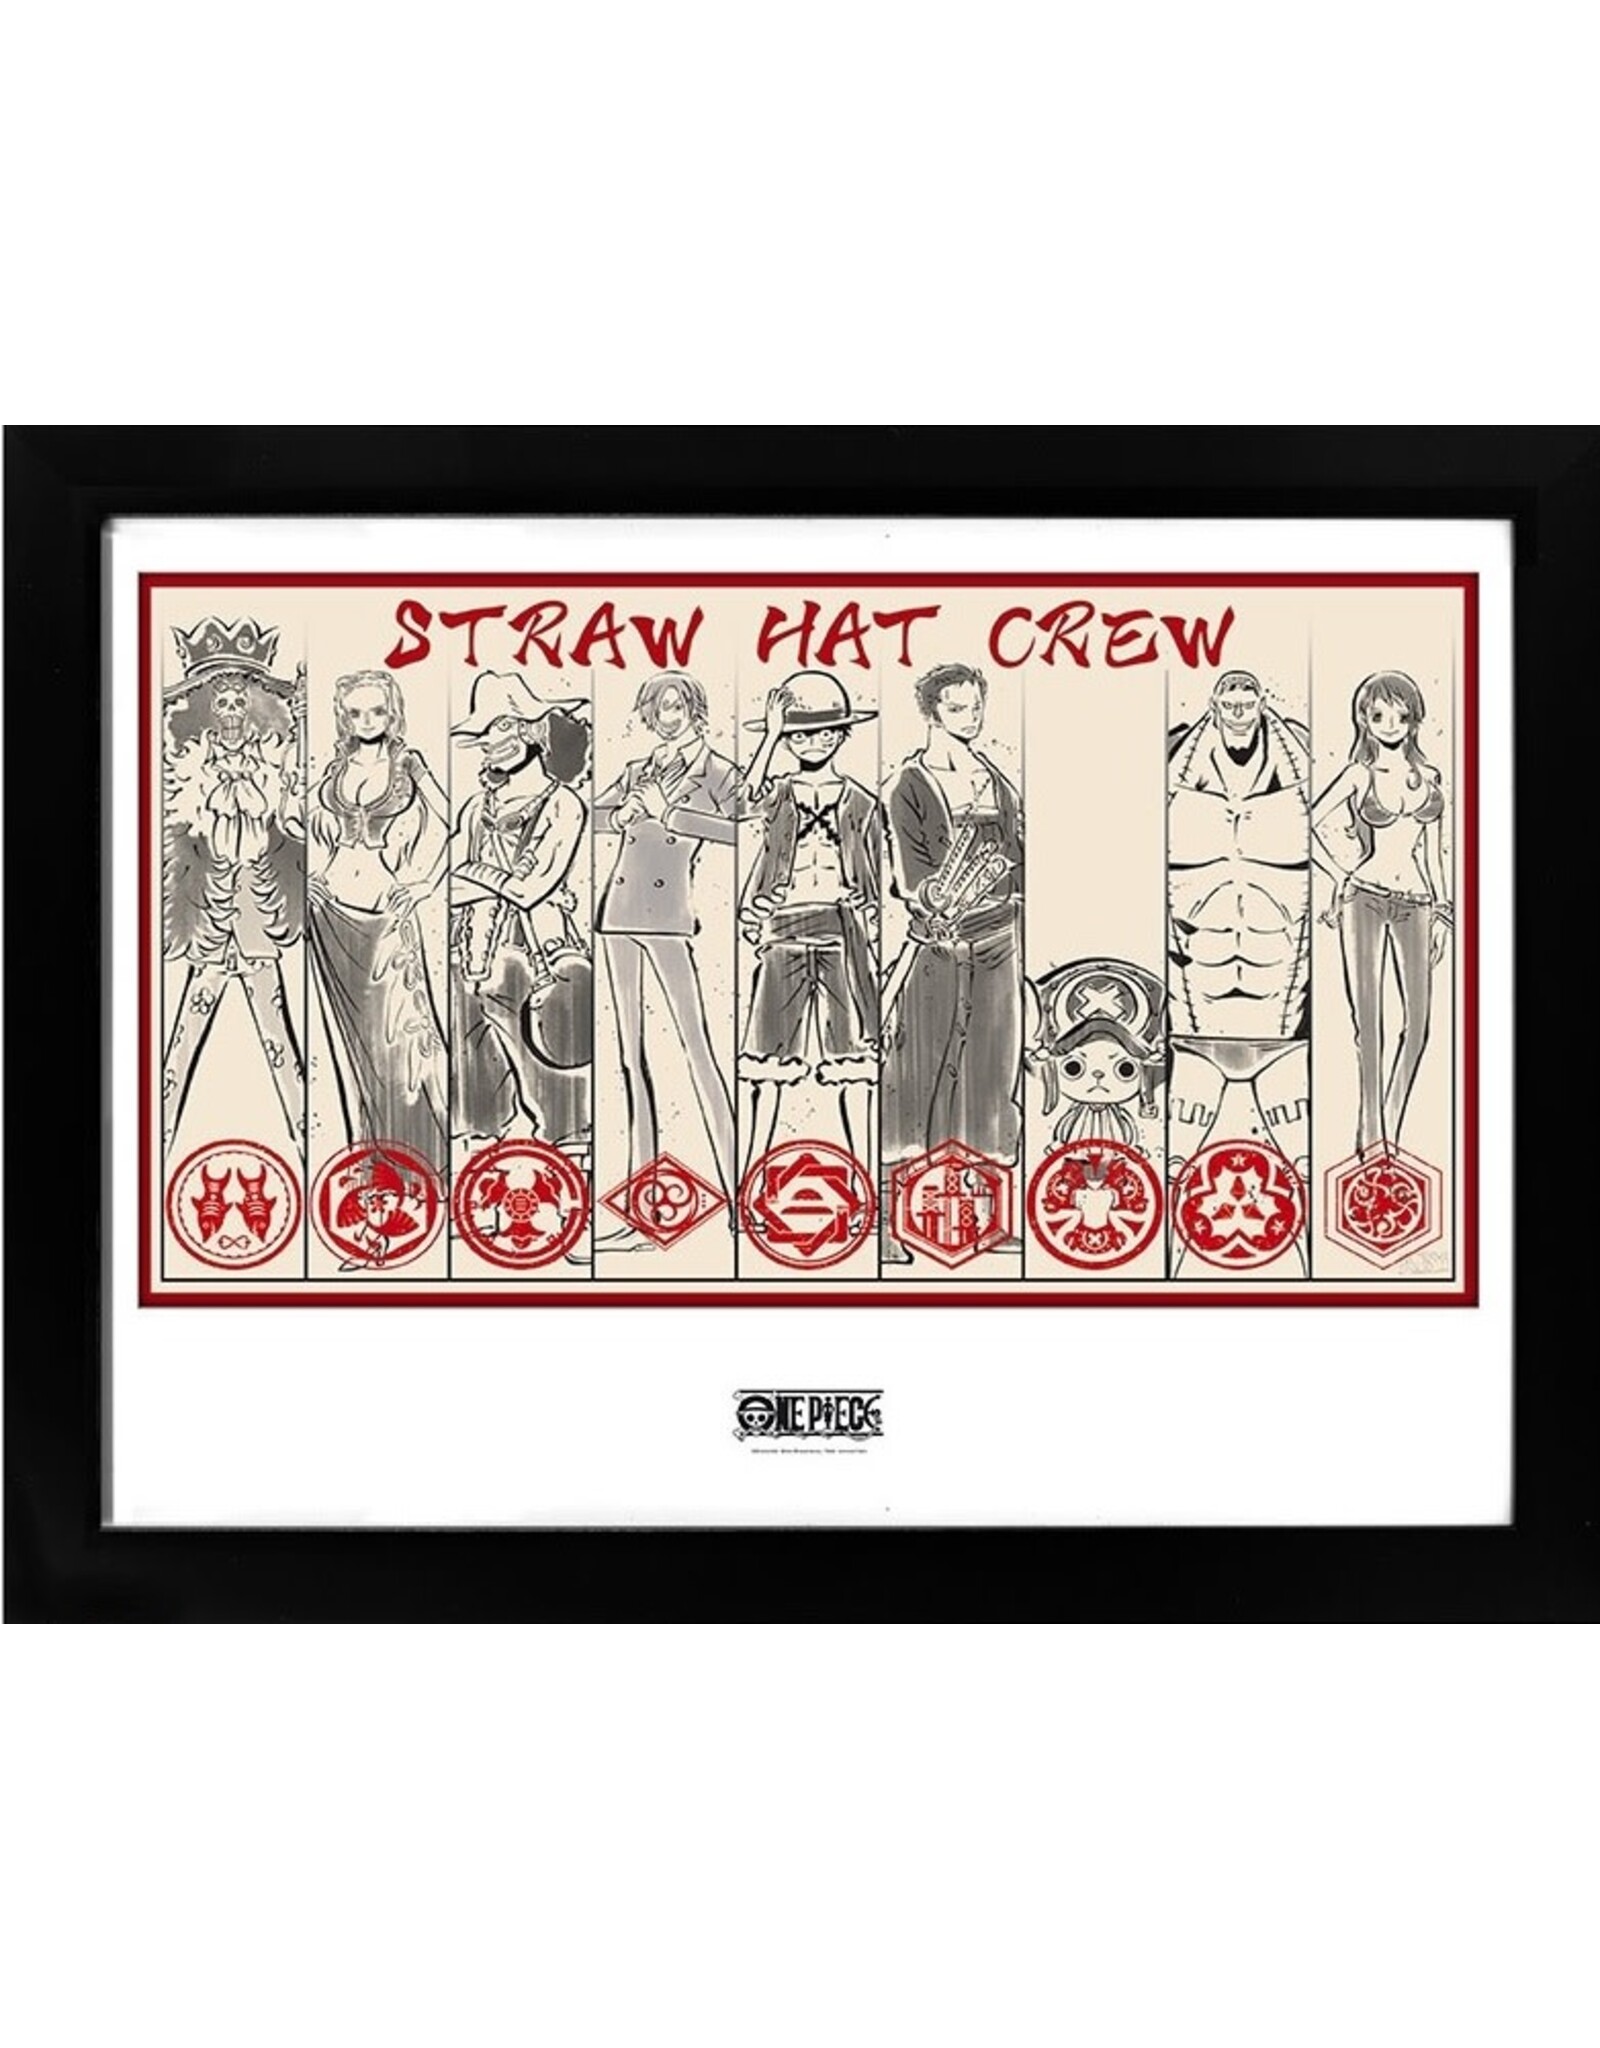 One Piece - Straw Hat Crew Framed Poster